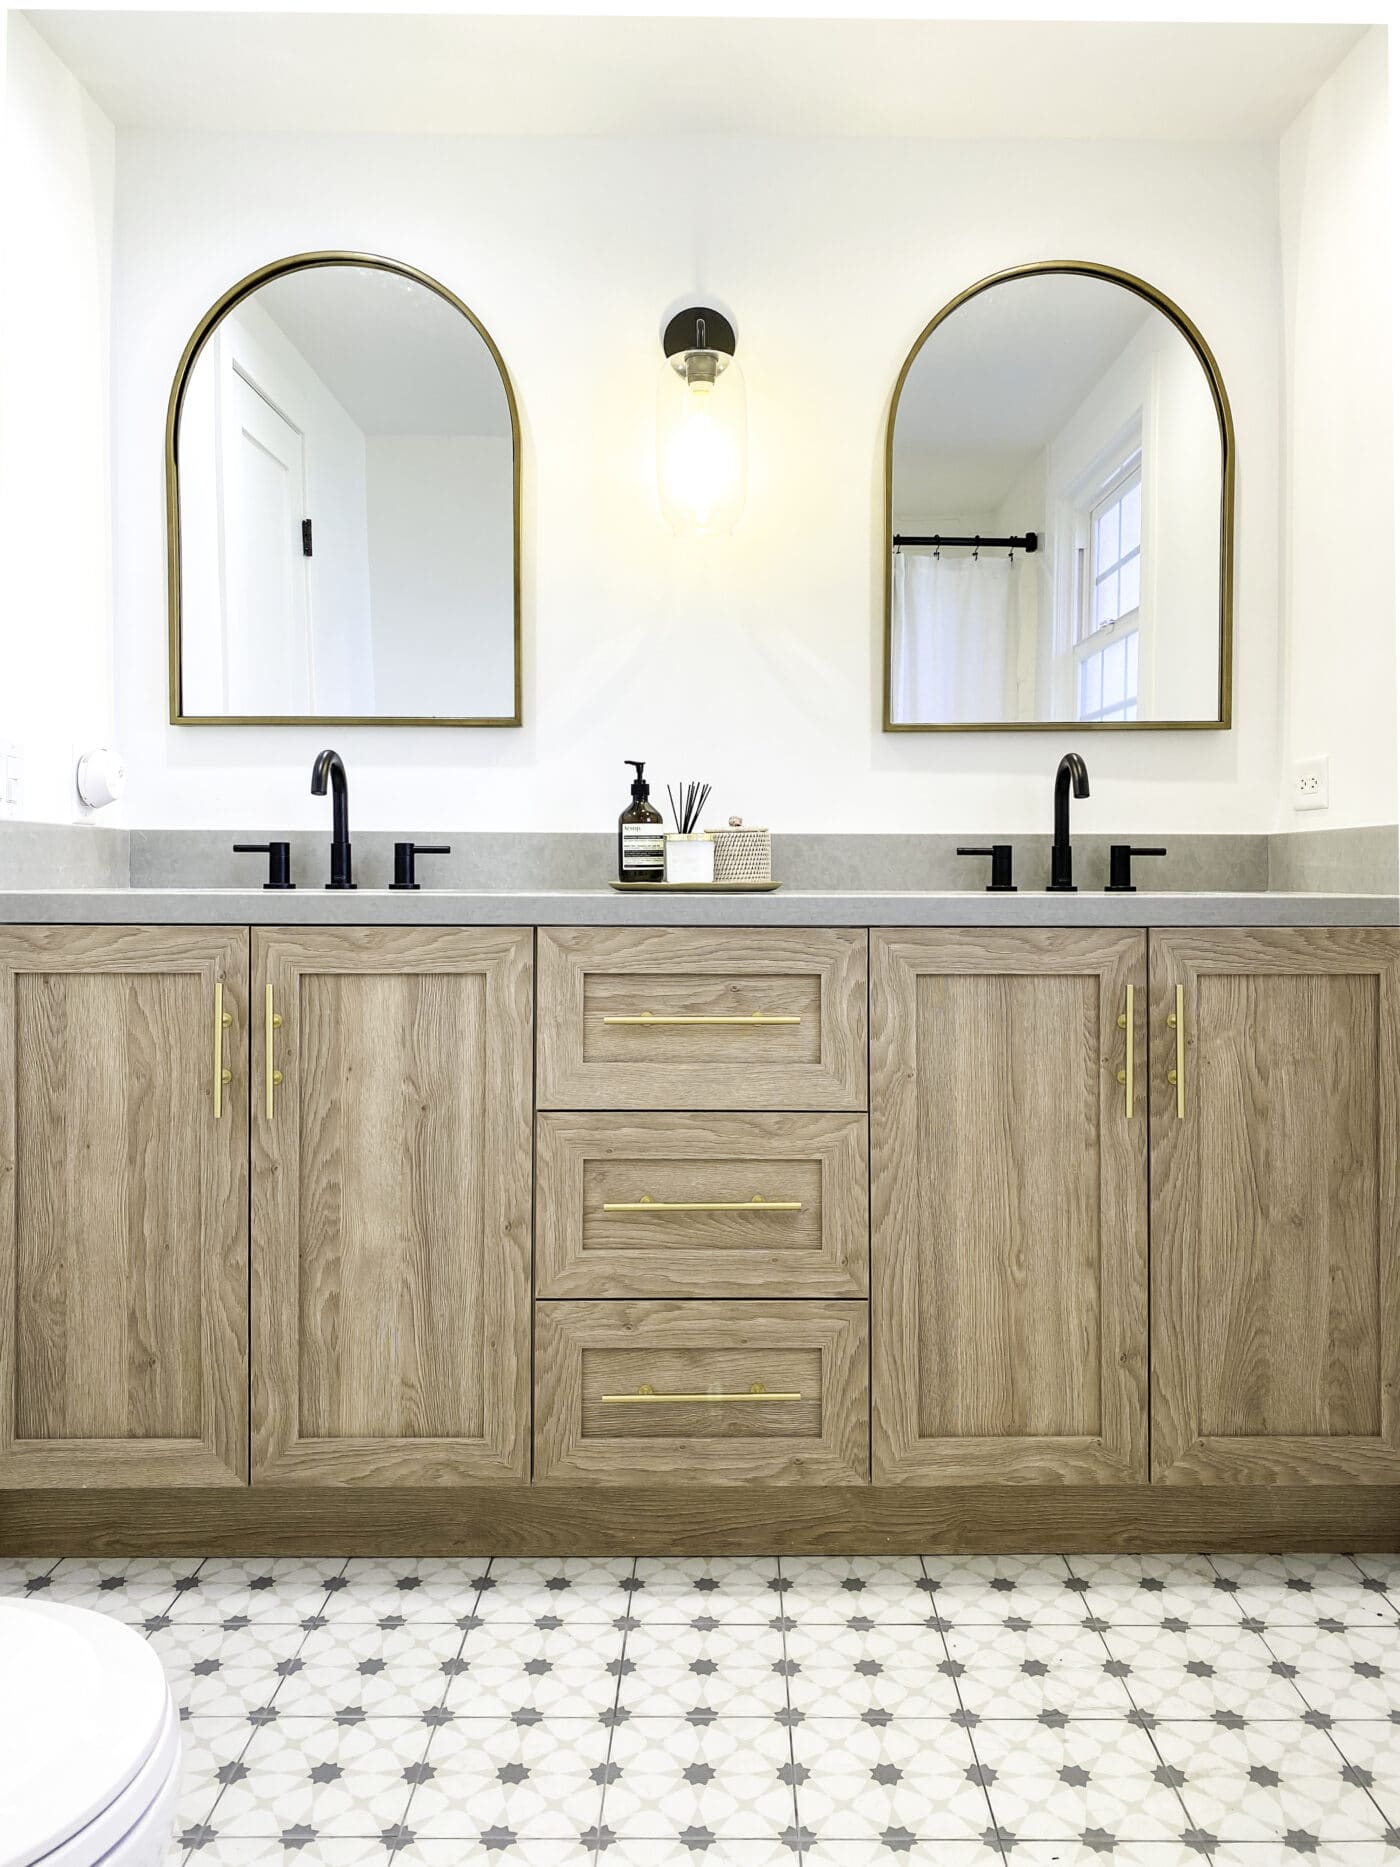 5 Bathrooms Featuring Chris Loves Julia’s Cove Cabinets - SemiStories